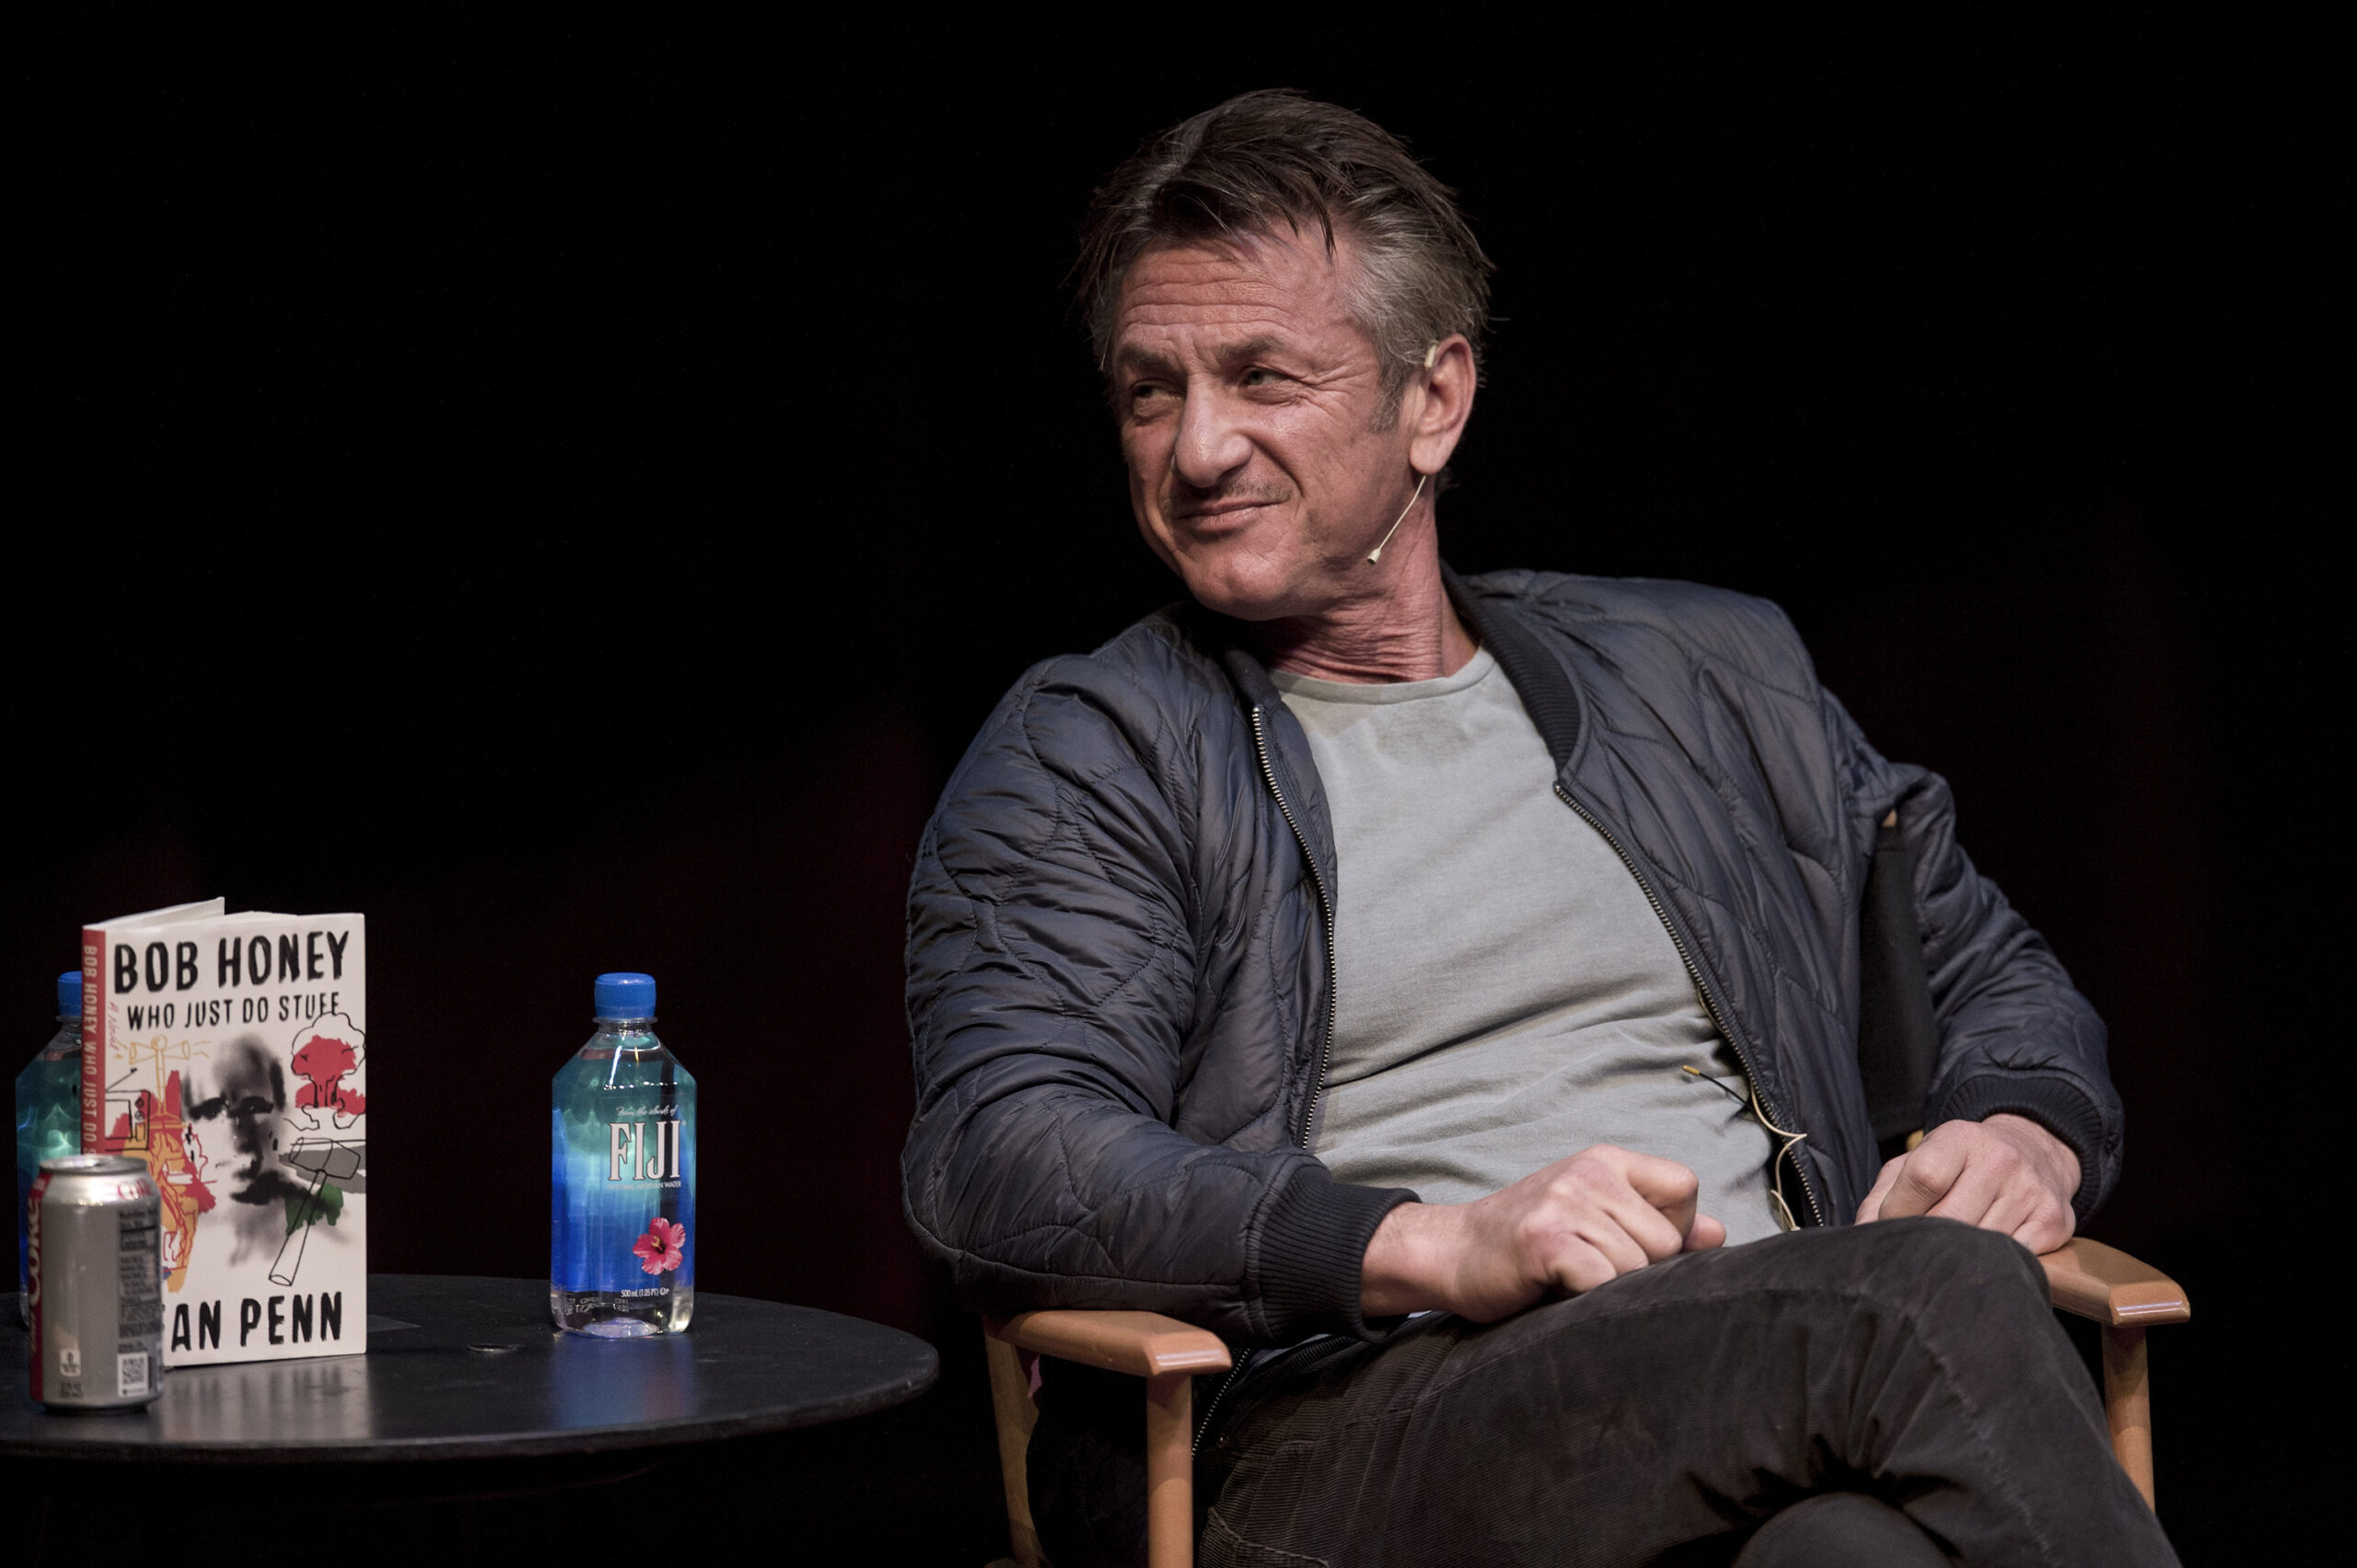 Sean Penn sits cross-legged and looks to his right, wearing an earpiece, a light navy-blue jacket, and a grey shirt. A bottle of Fiji water and a book titled, "Bob Honey Who Just Do Stuff," stand on a table to his right.